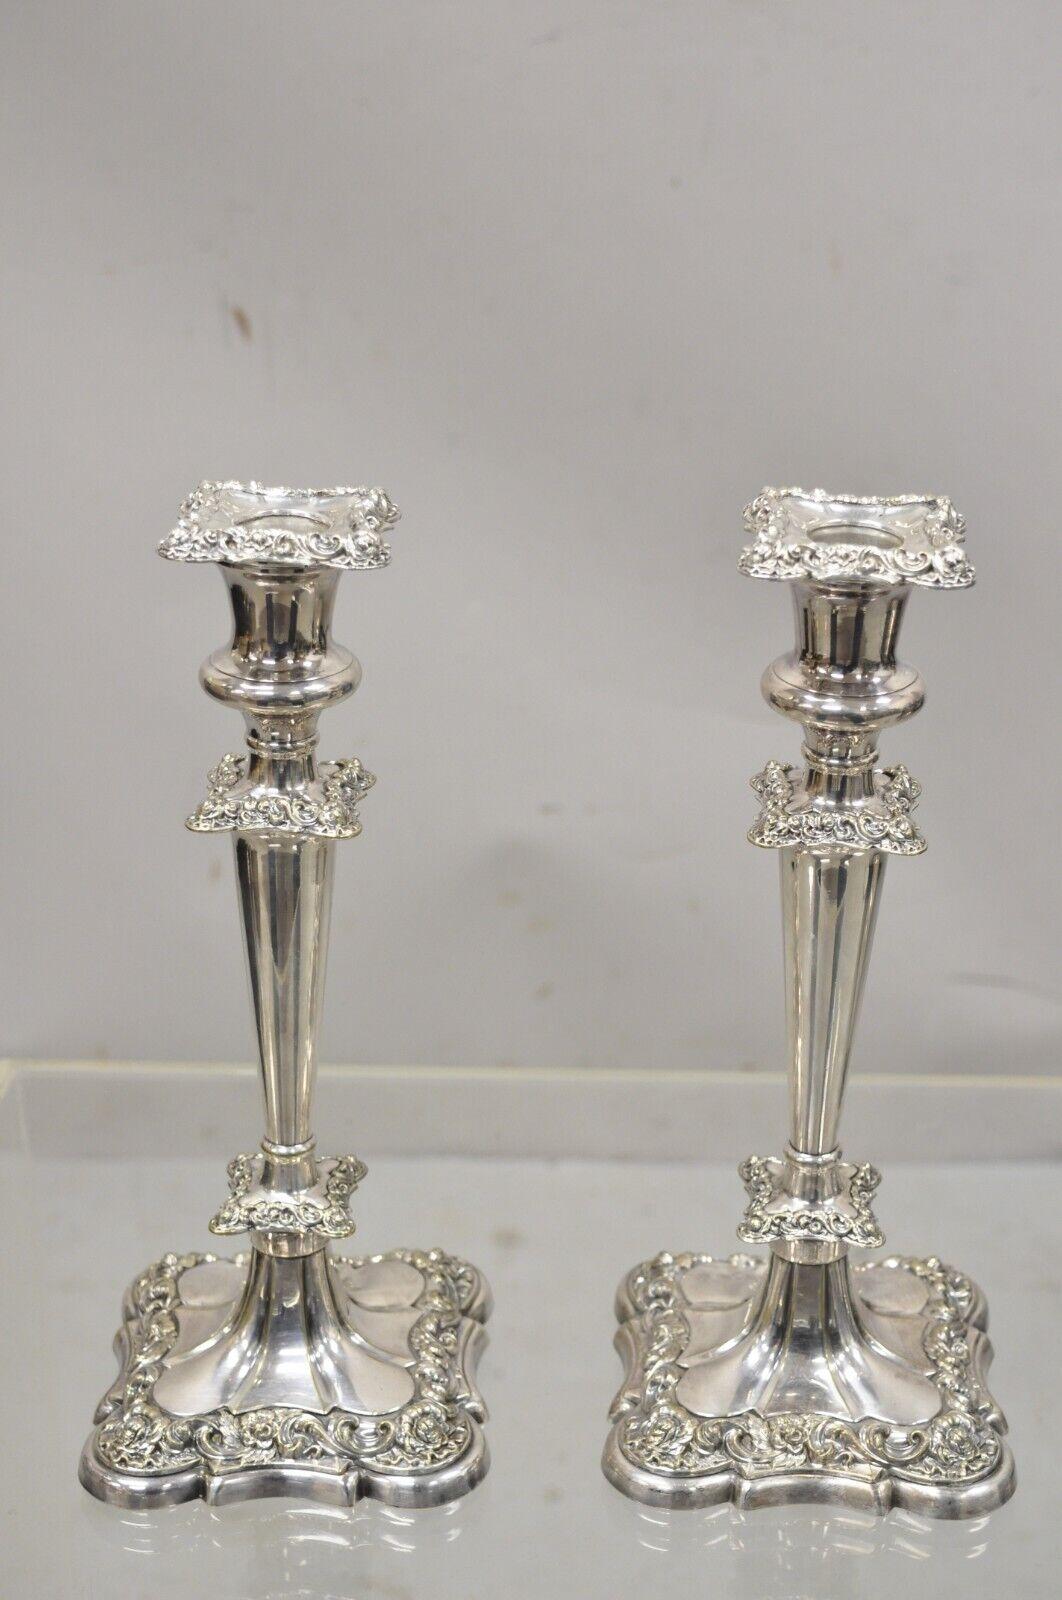 Antique Gorham Floral Repousse Silver Plate Candlestick Candle Holder a Pair 2